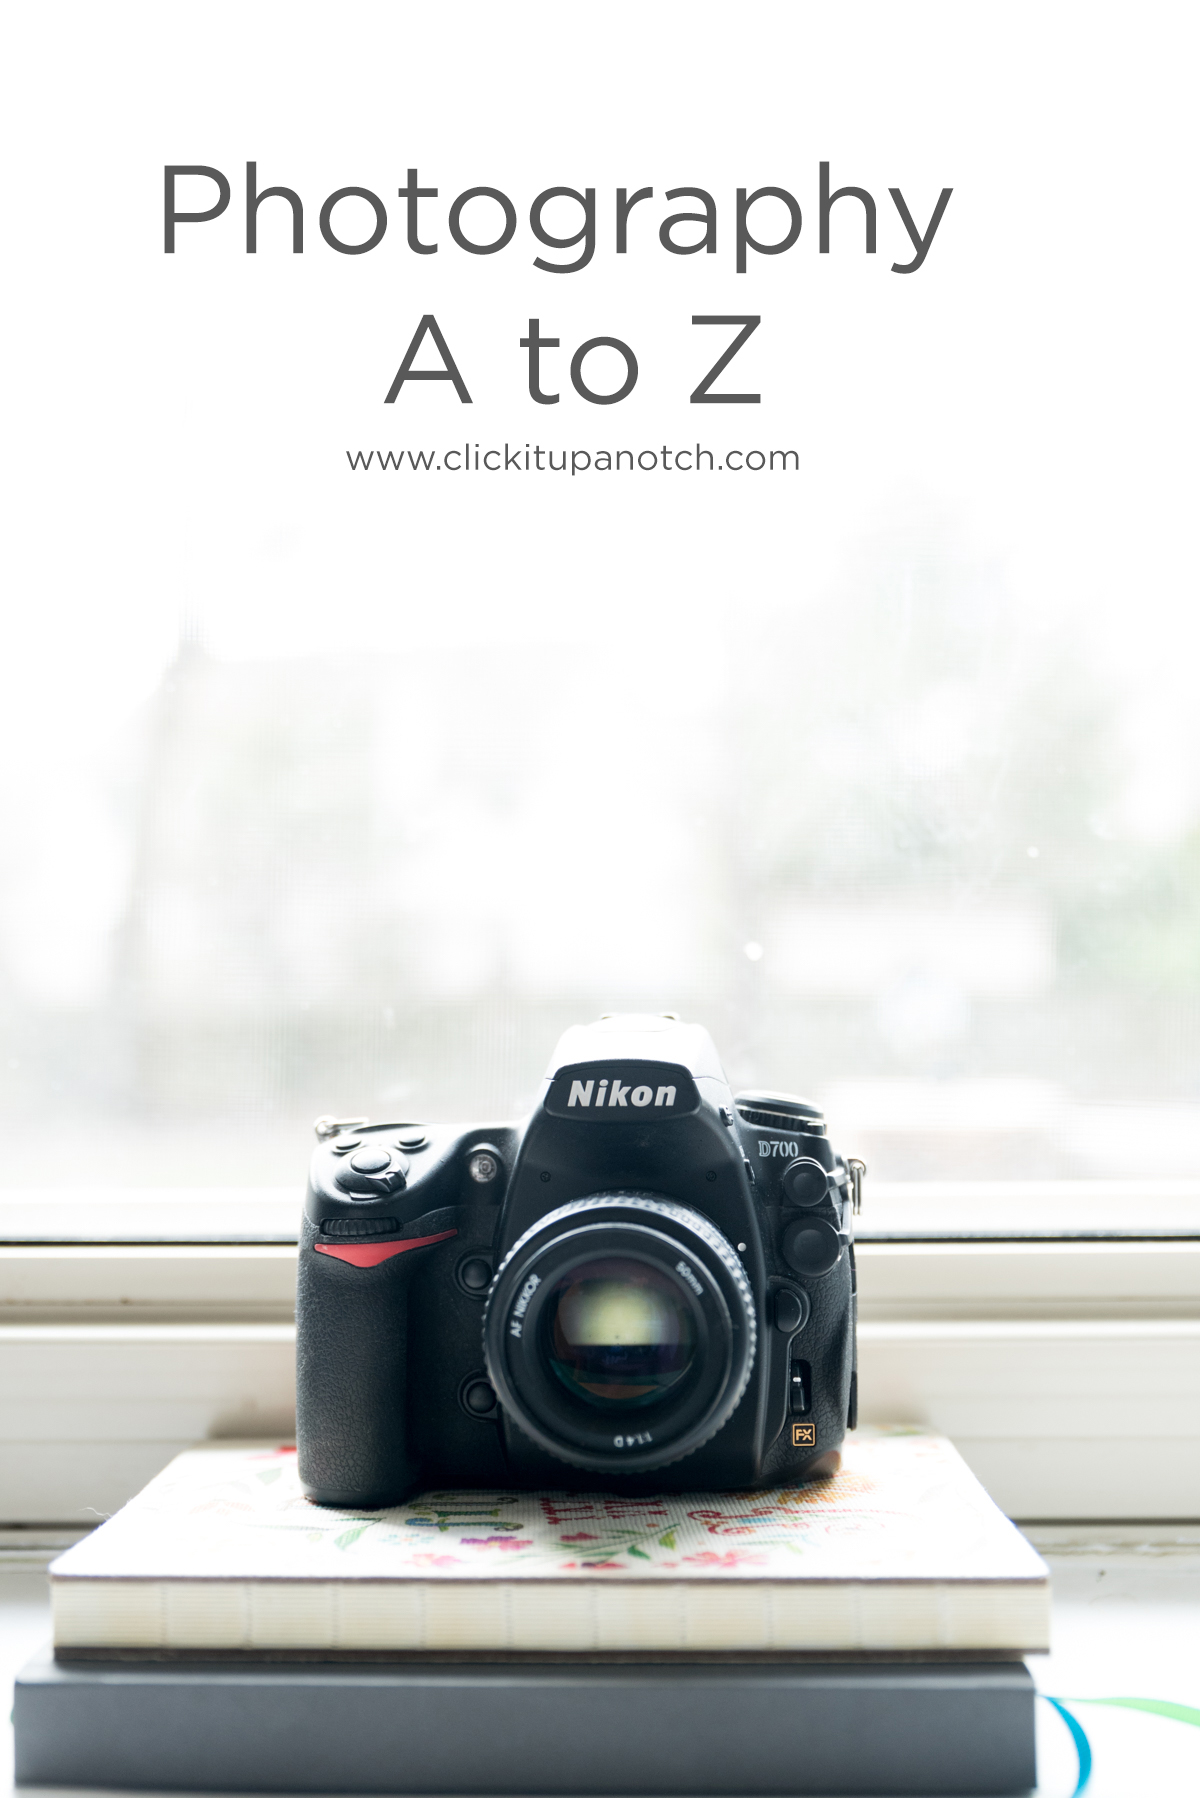 Photography A to Z